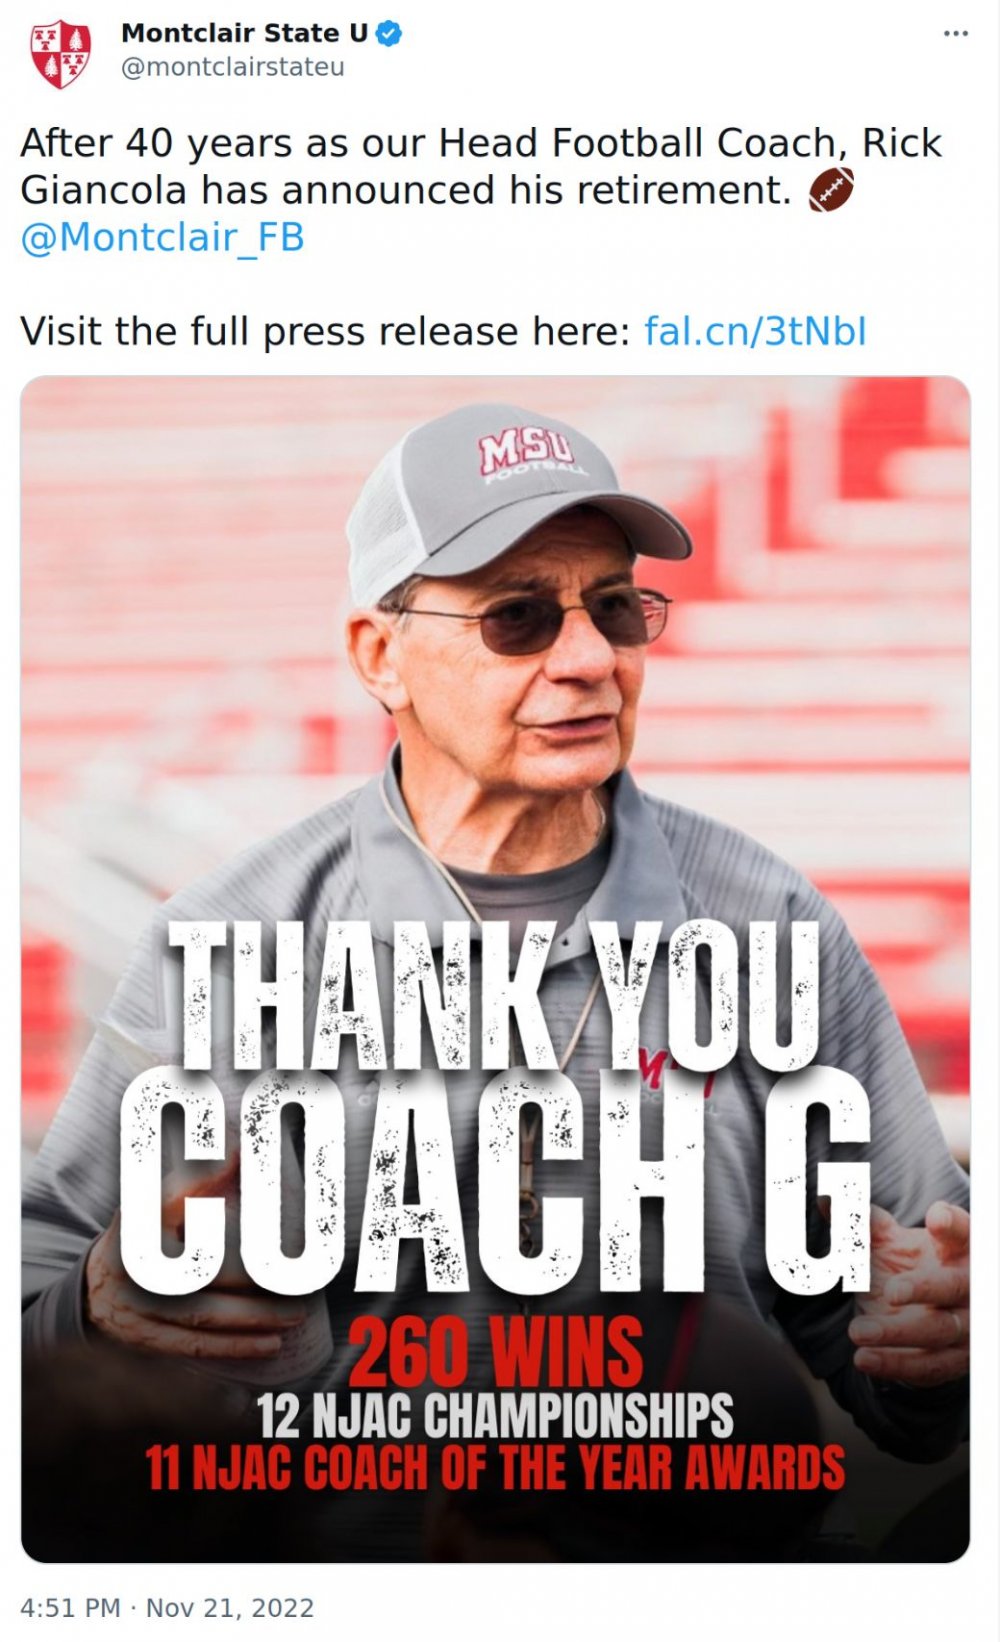 @montclairstateu: After 40 years as our Head Football Coach, Rick Giancola has announced his retirement.